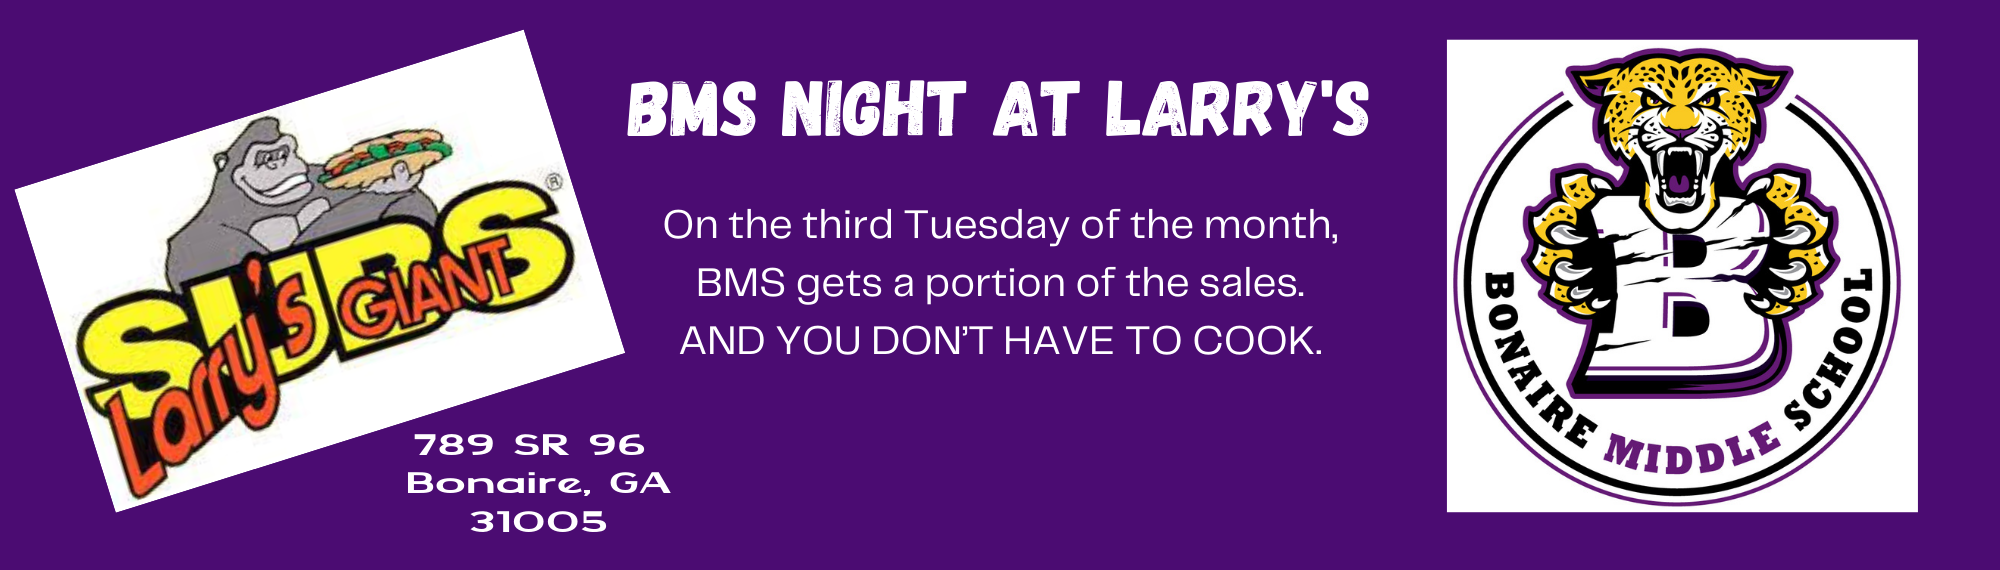 Larry's Gian Subs 789 SR 96 Bonaire, GA 31005. BMS Night at Larry's - On the third Tuesday of the month, BMS gets a portion of the sales.  And you don't have to cook.